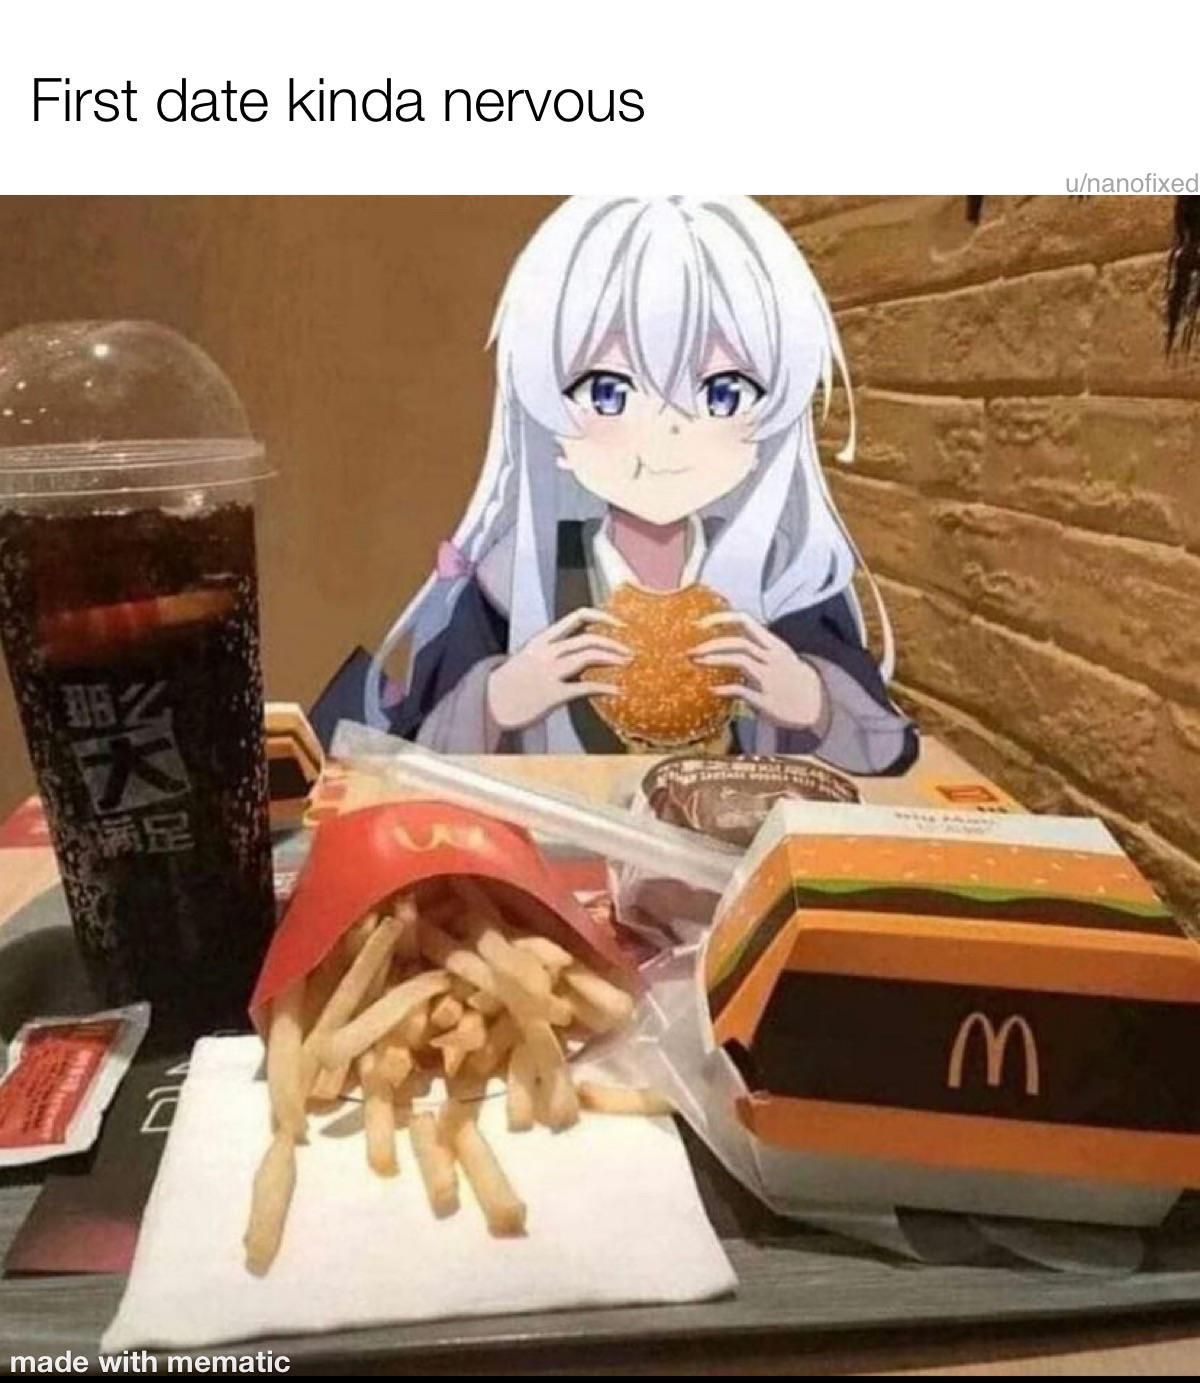 I’m the type of girl who would want McDonald’s as a date lol